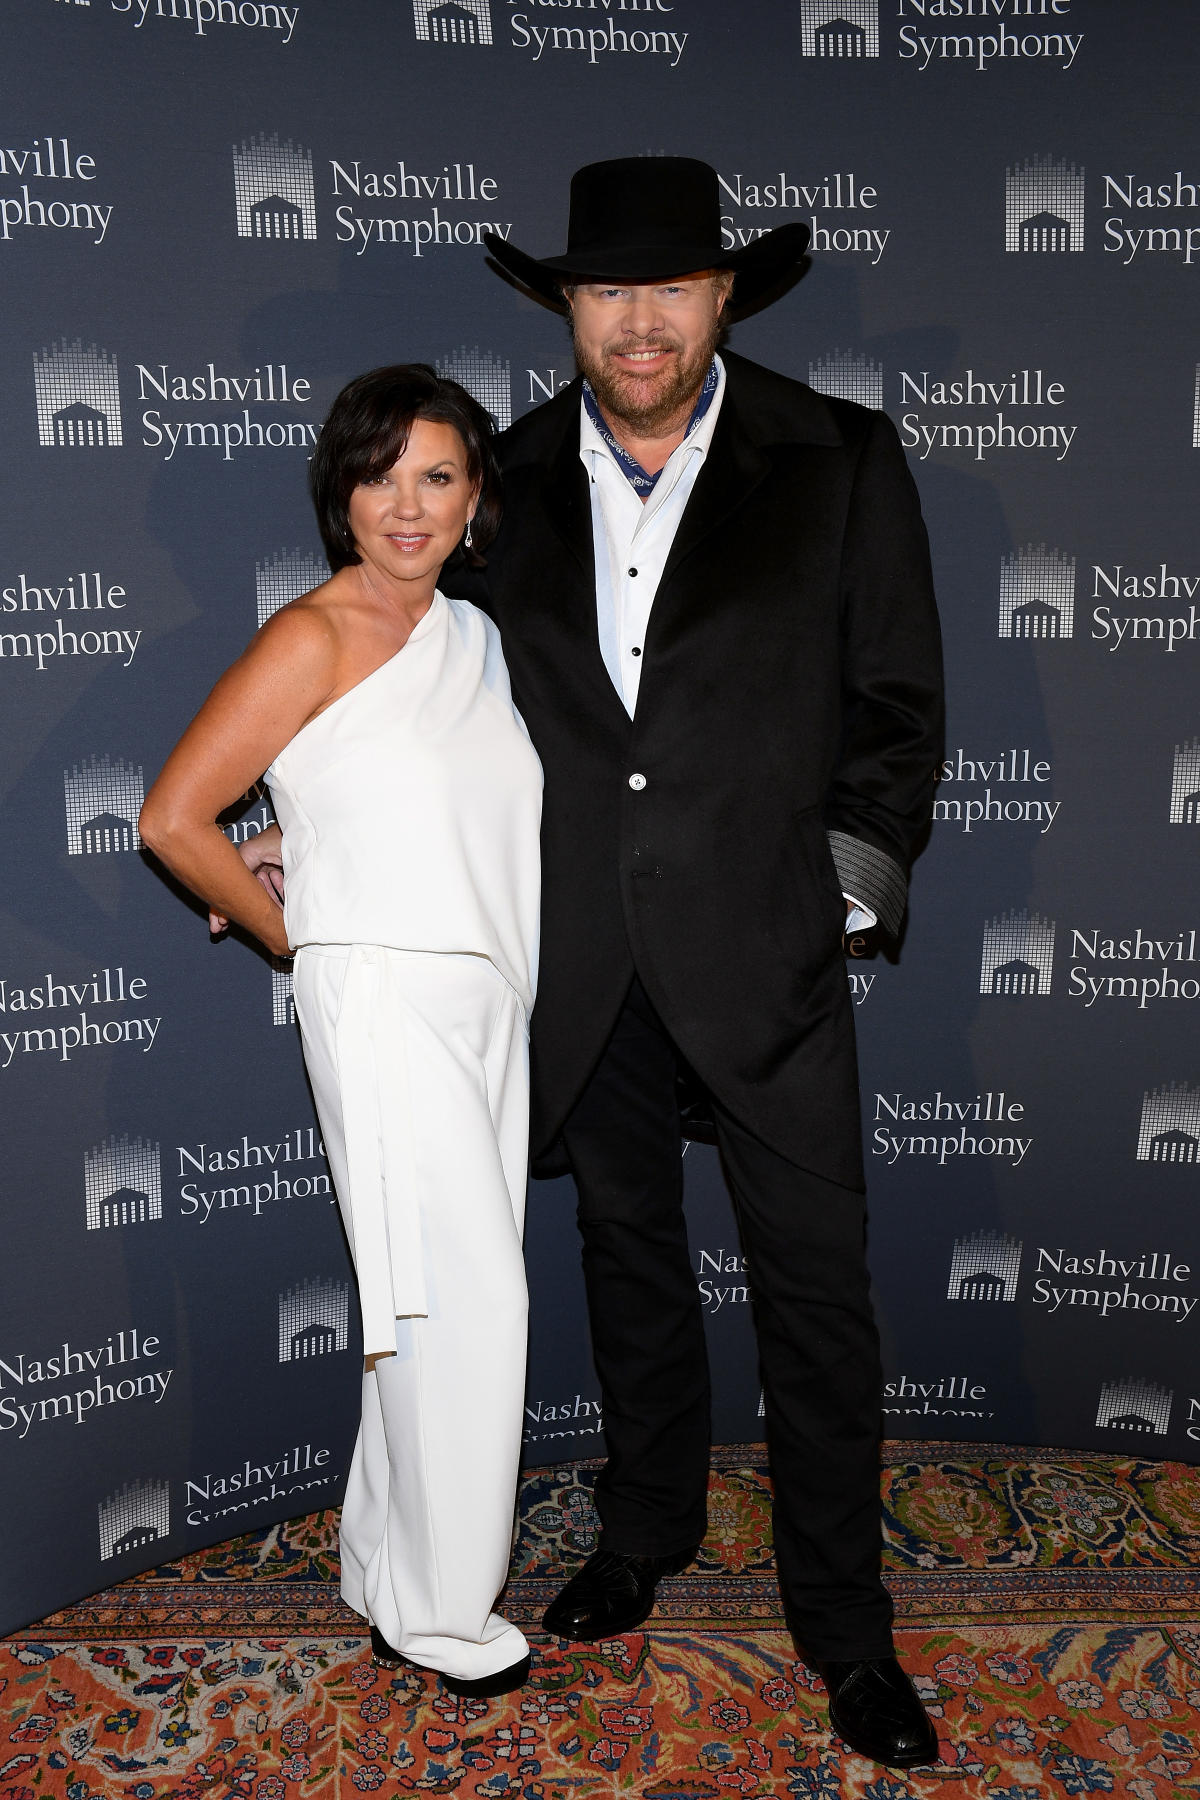 Who Was Toby Keith Married To? Meet His Supportive Wife Tricia Lucus ...